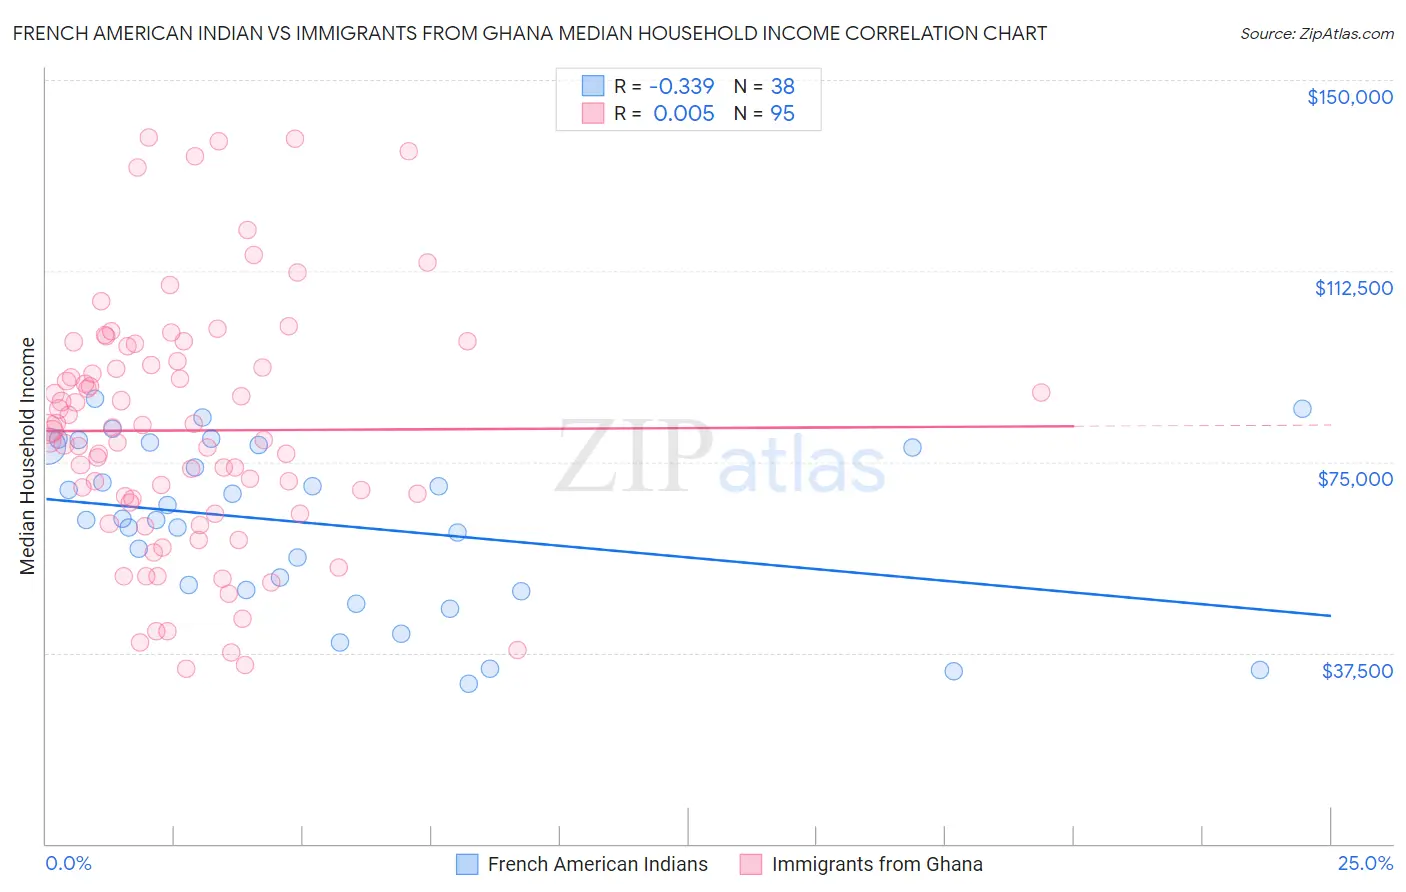 French American Indian vs Immigrants from Ghana Median Household Income